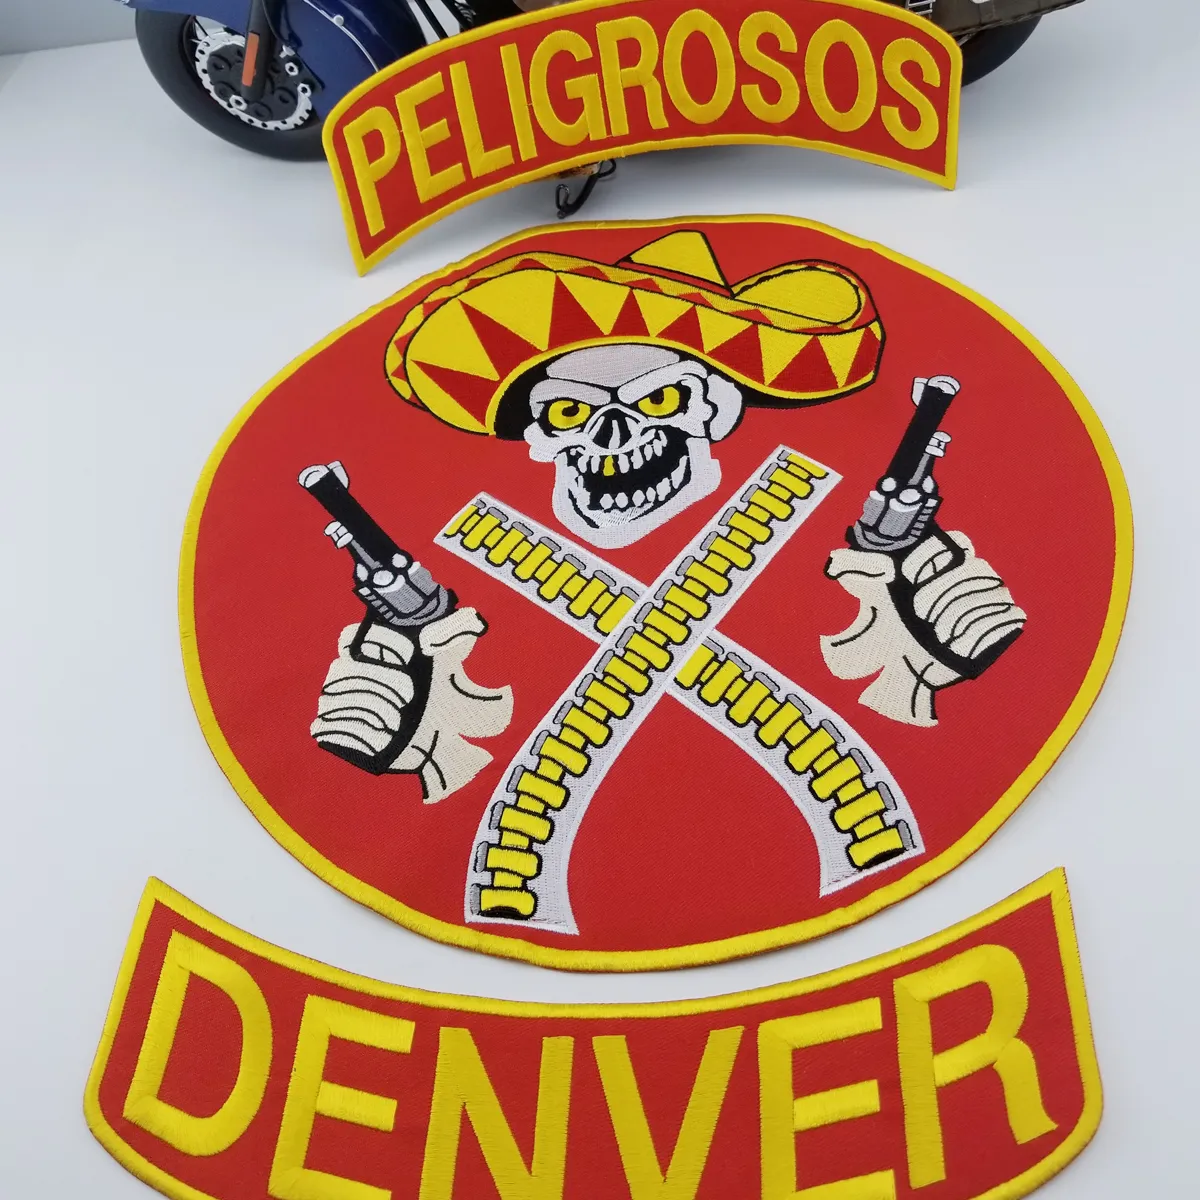 PELIGROSOS  Red  Motorcycle Club Vest Jacket Biker MC Embroidery Patches Iron on Large Back Patches